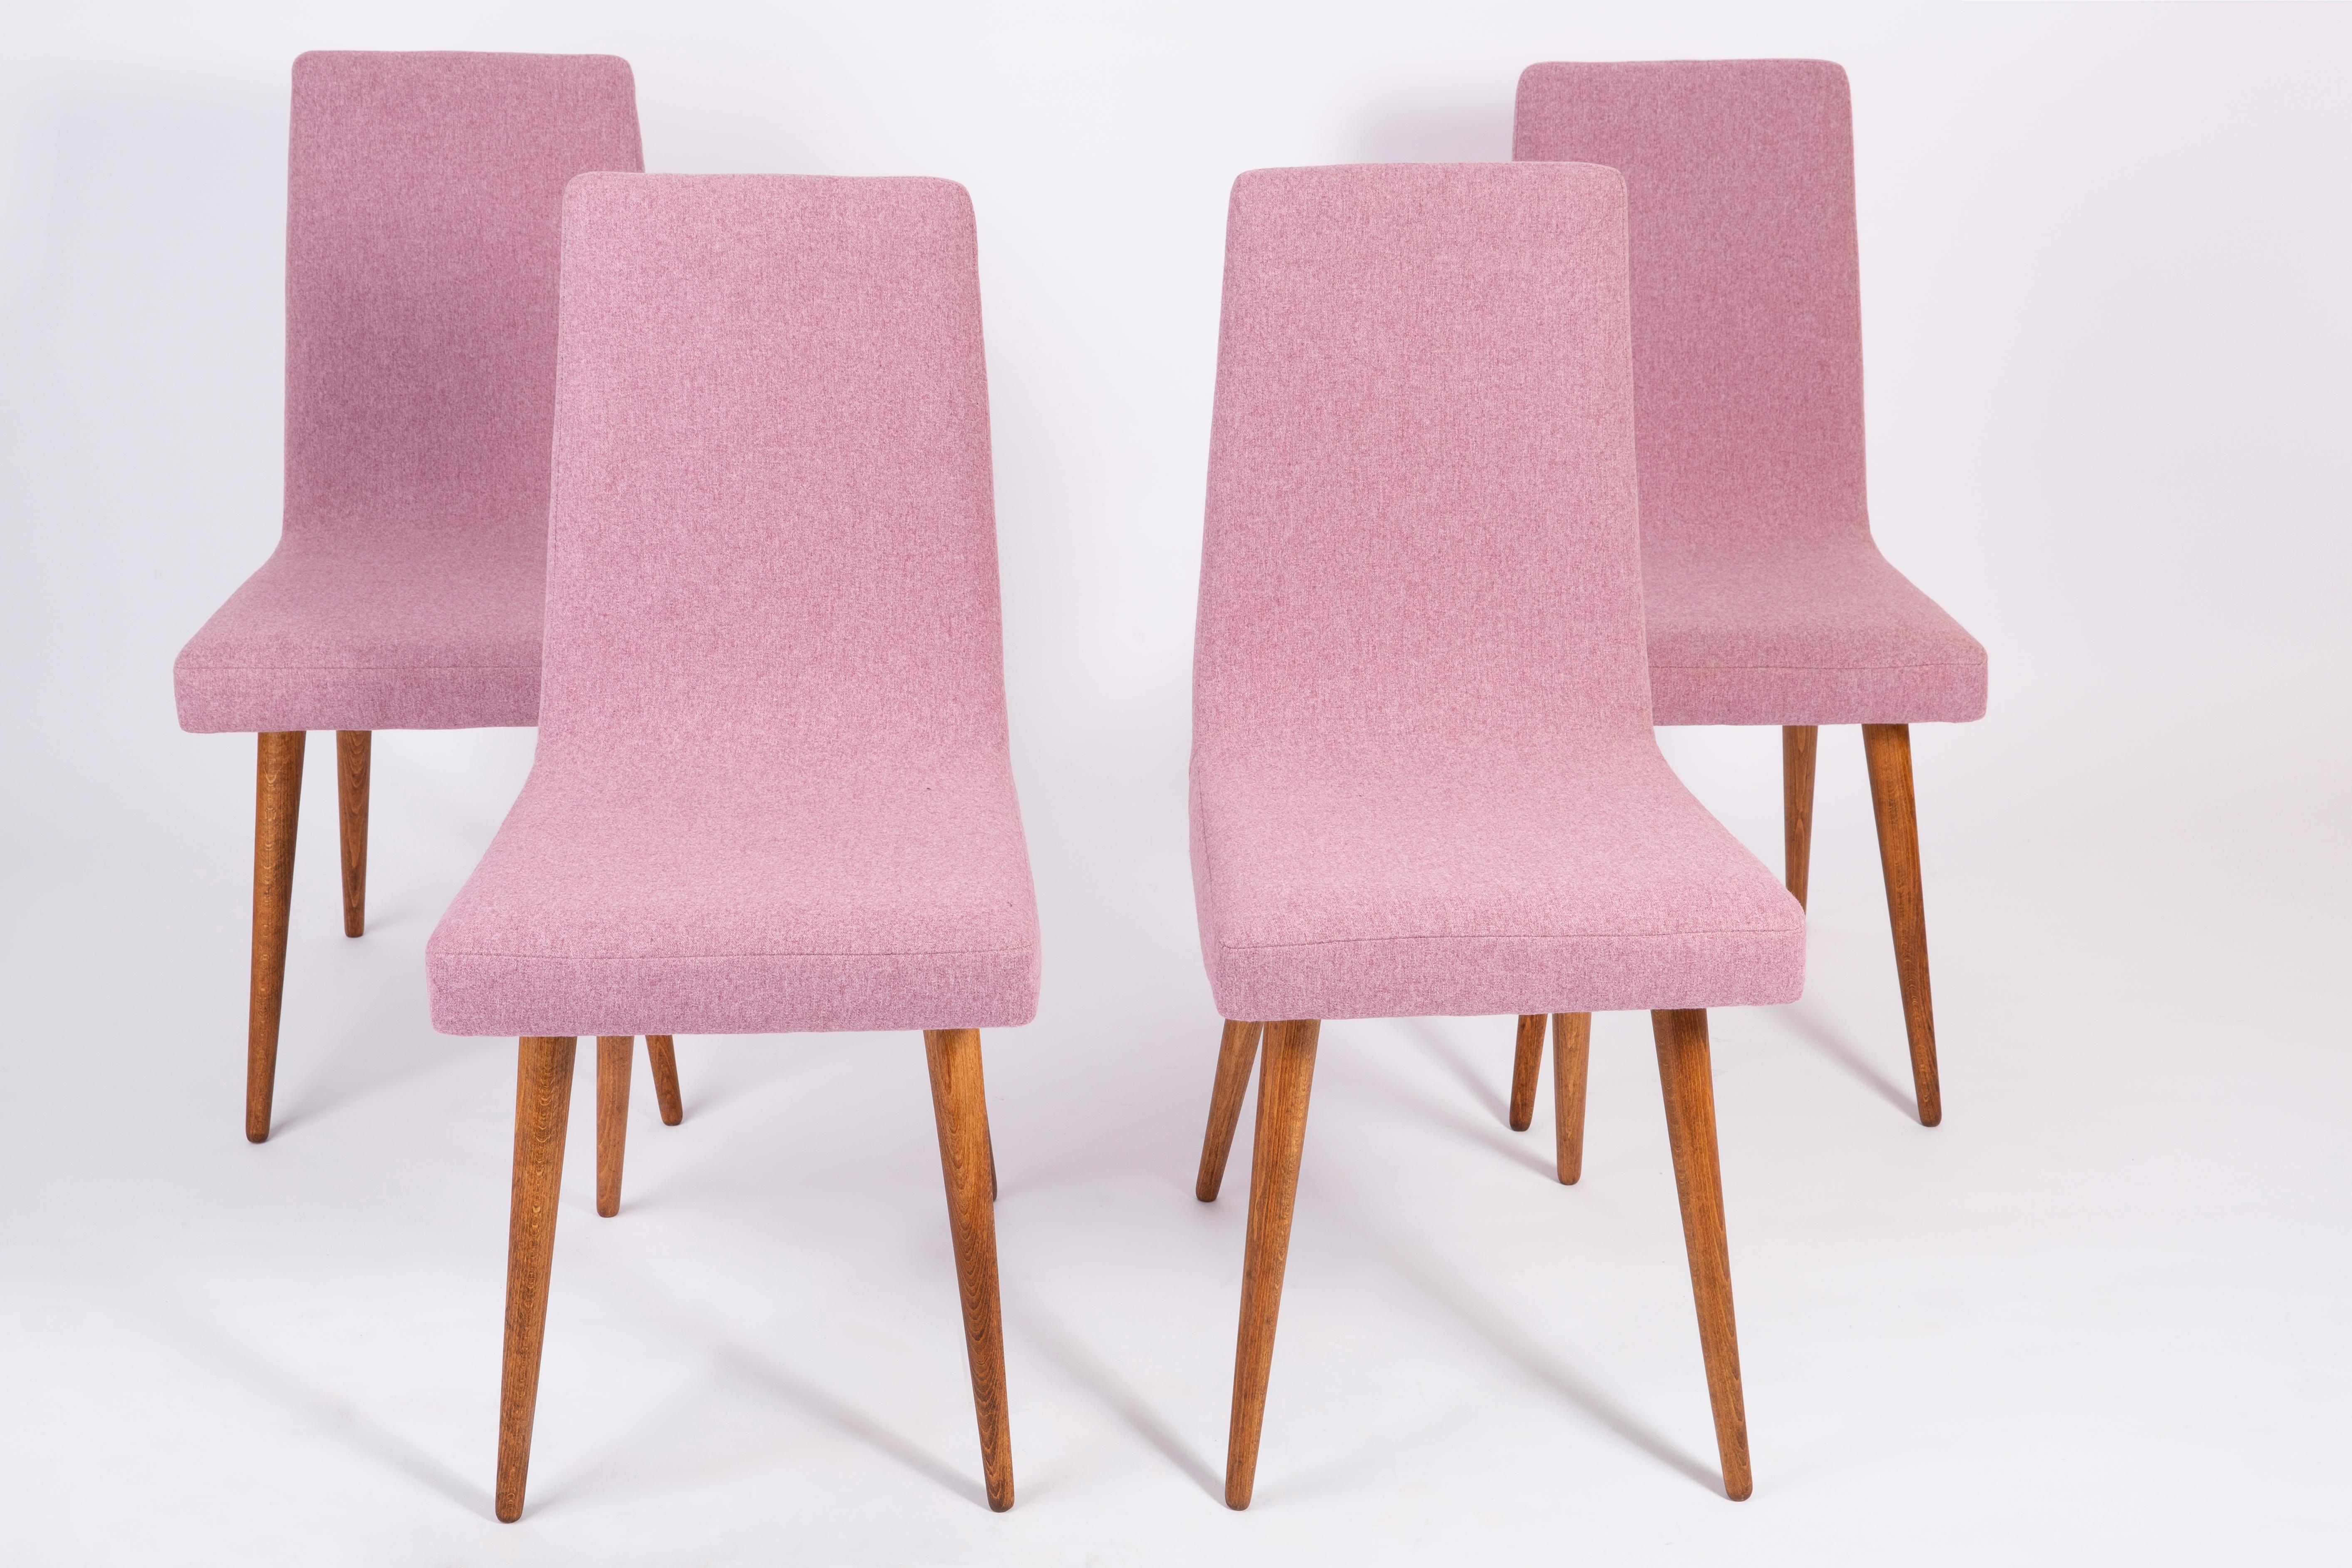 Polish Set of Four Mid-Century Vintage Pink Melange Chairs, Europe, 1960s For Sale